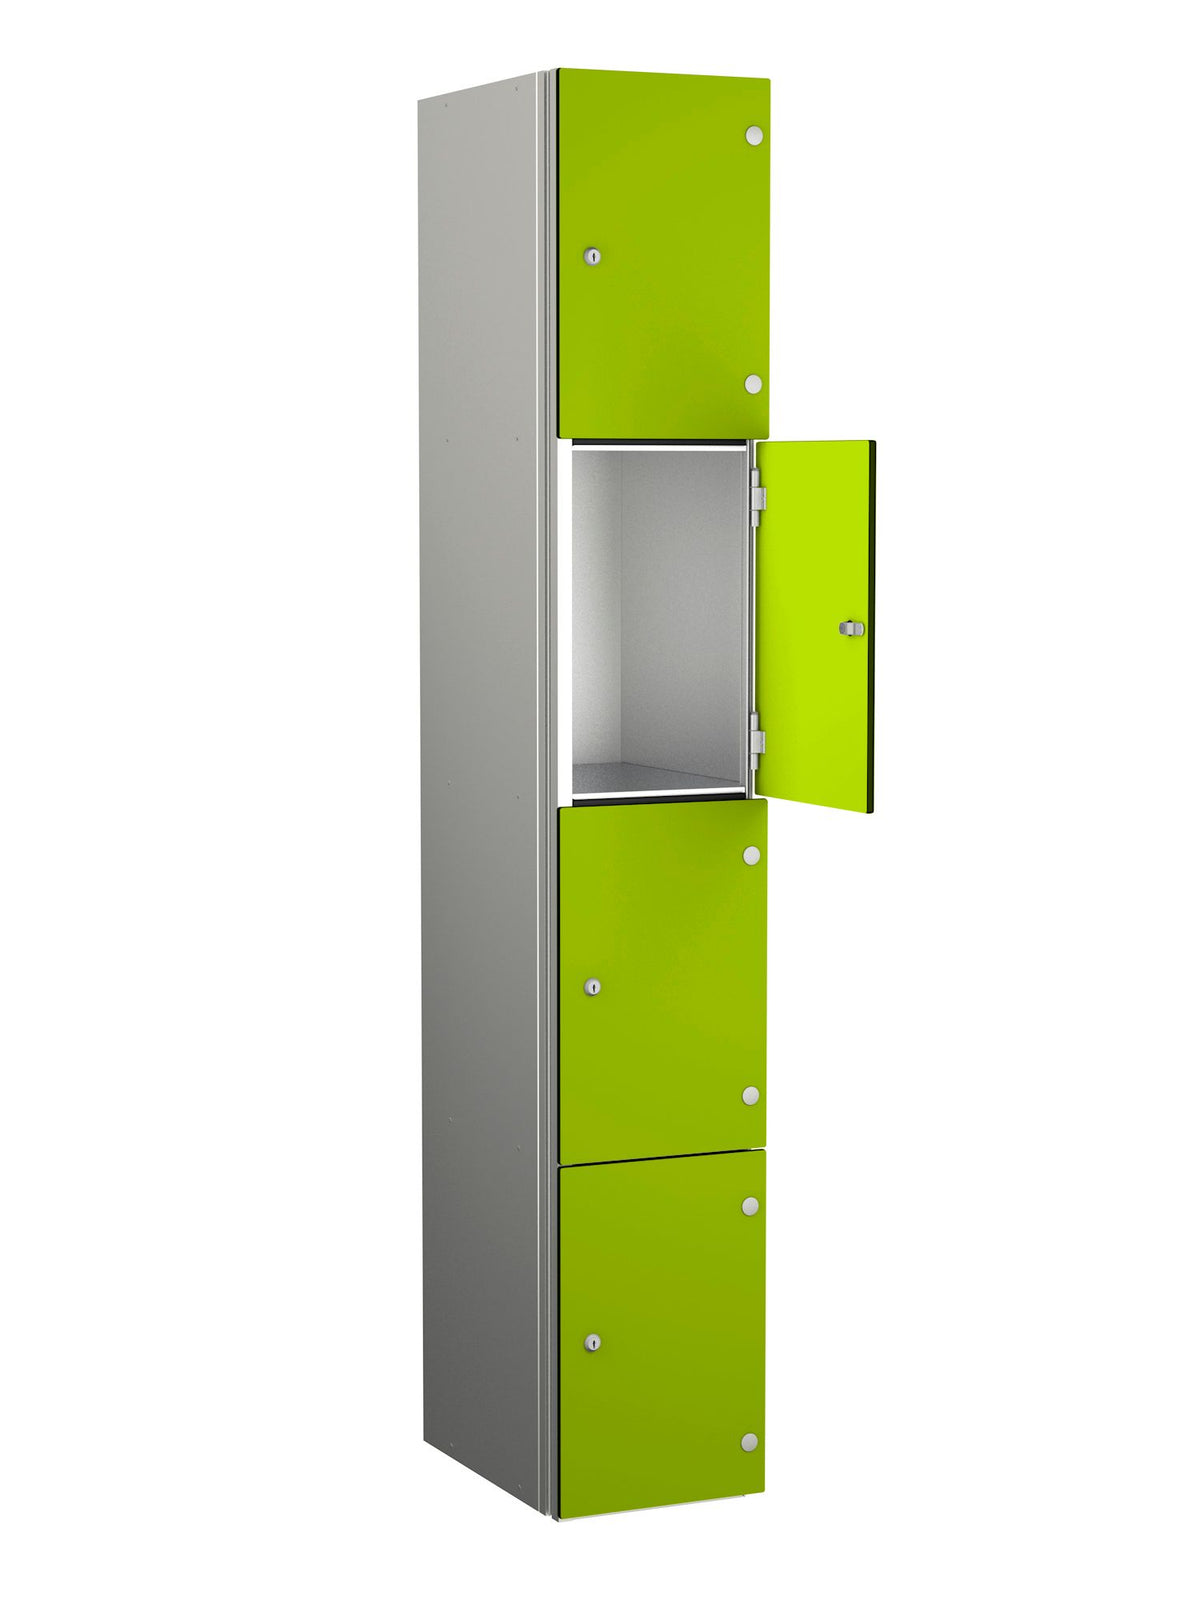 ZENBOX WET AREA LOCKERS WITH SGL DOORS - LIME GREEN 4 DOOR Storage Lockers > Lockers > Cabinets > Storage > Probe > One Stop For Safety   